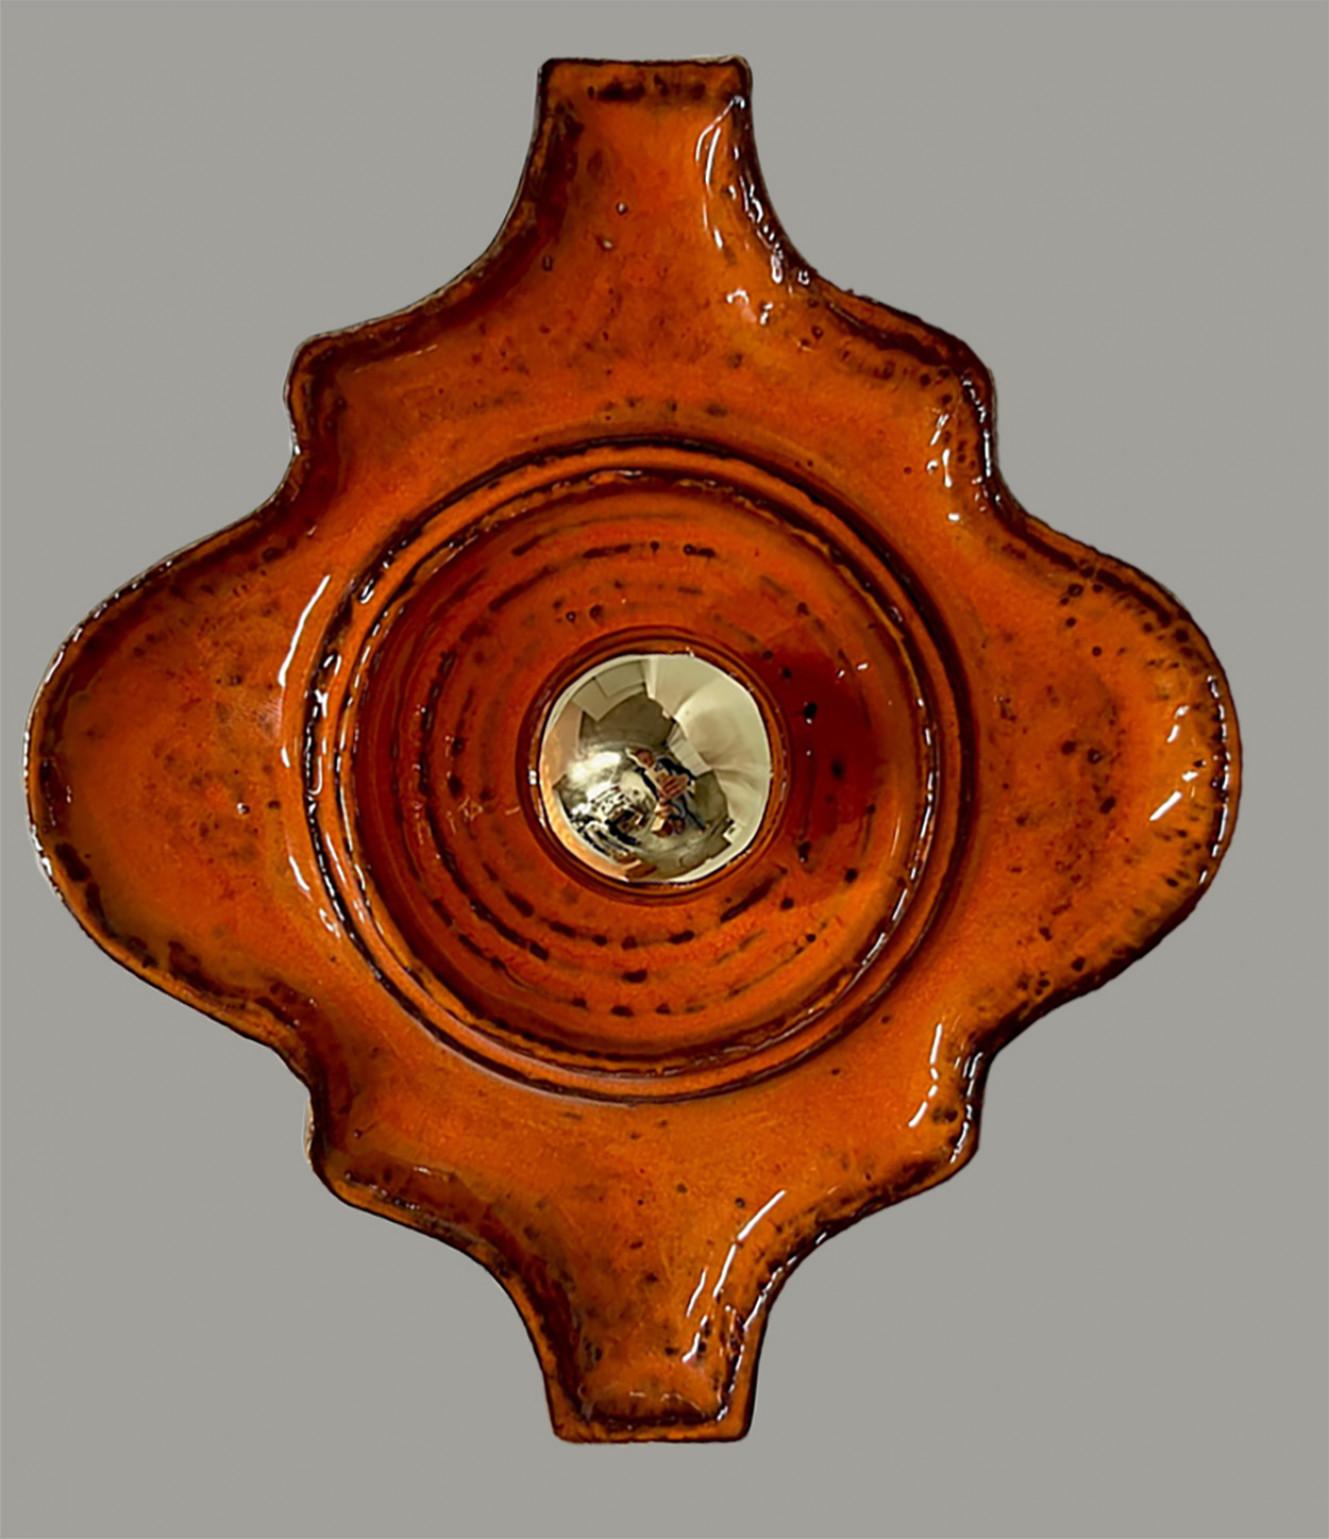 Playful orange ceramic wall light in Manufactured in Germany in the 1970s.

The style of the glaze is called 'Fat Lava'. Which means the glaze is thick on some parts, like lava.
A typical way to finish ceramic in mid-century West-Germany,